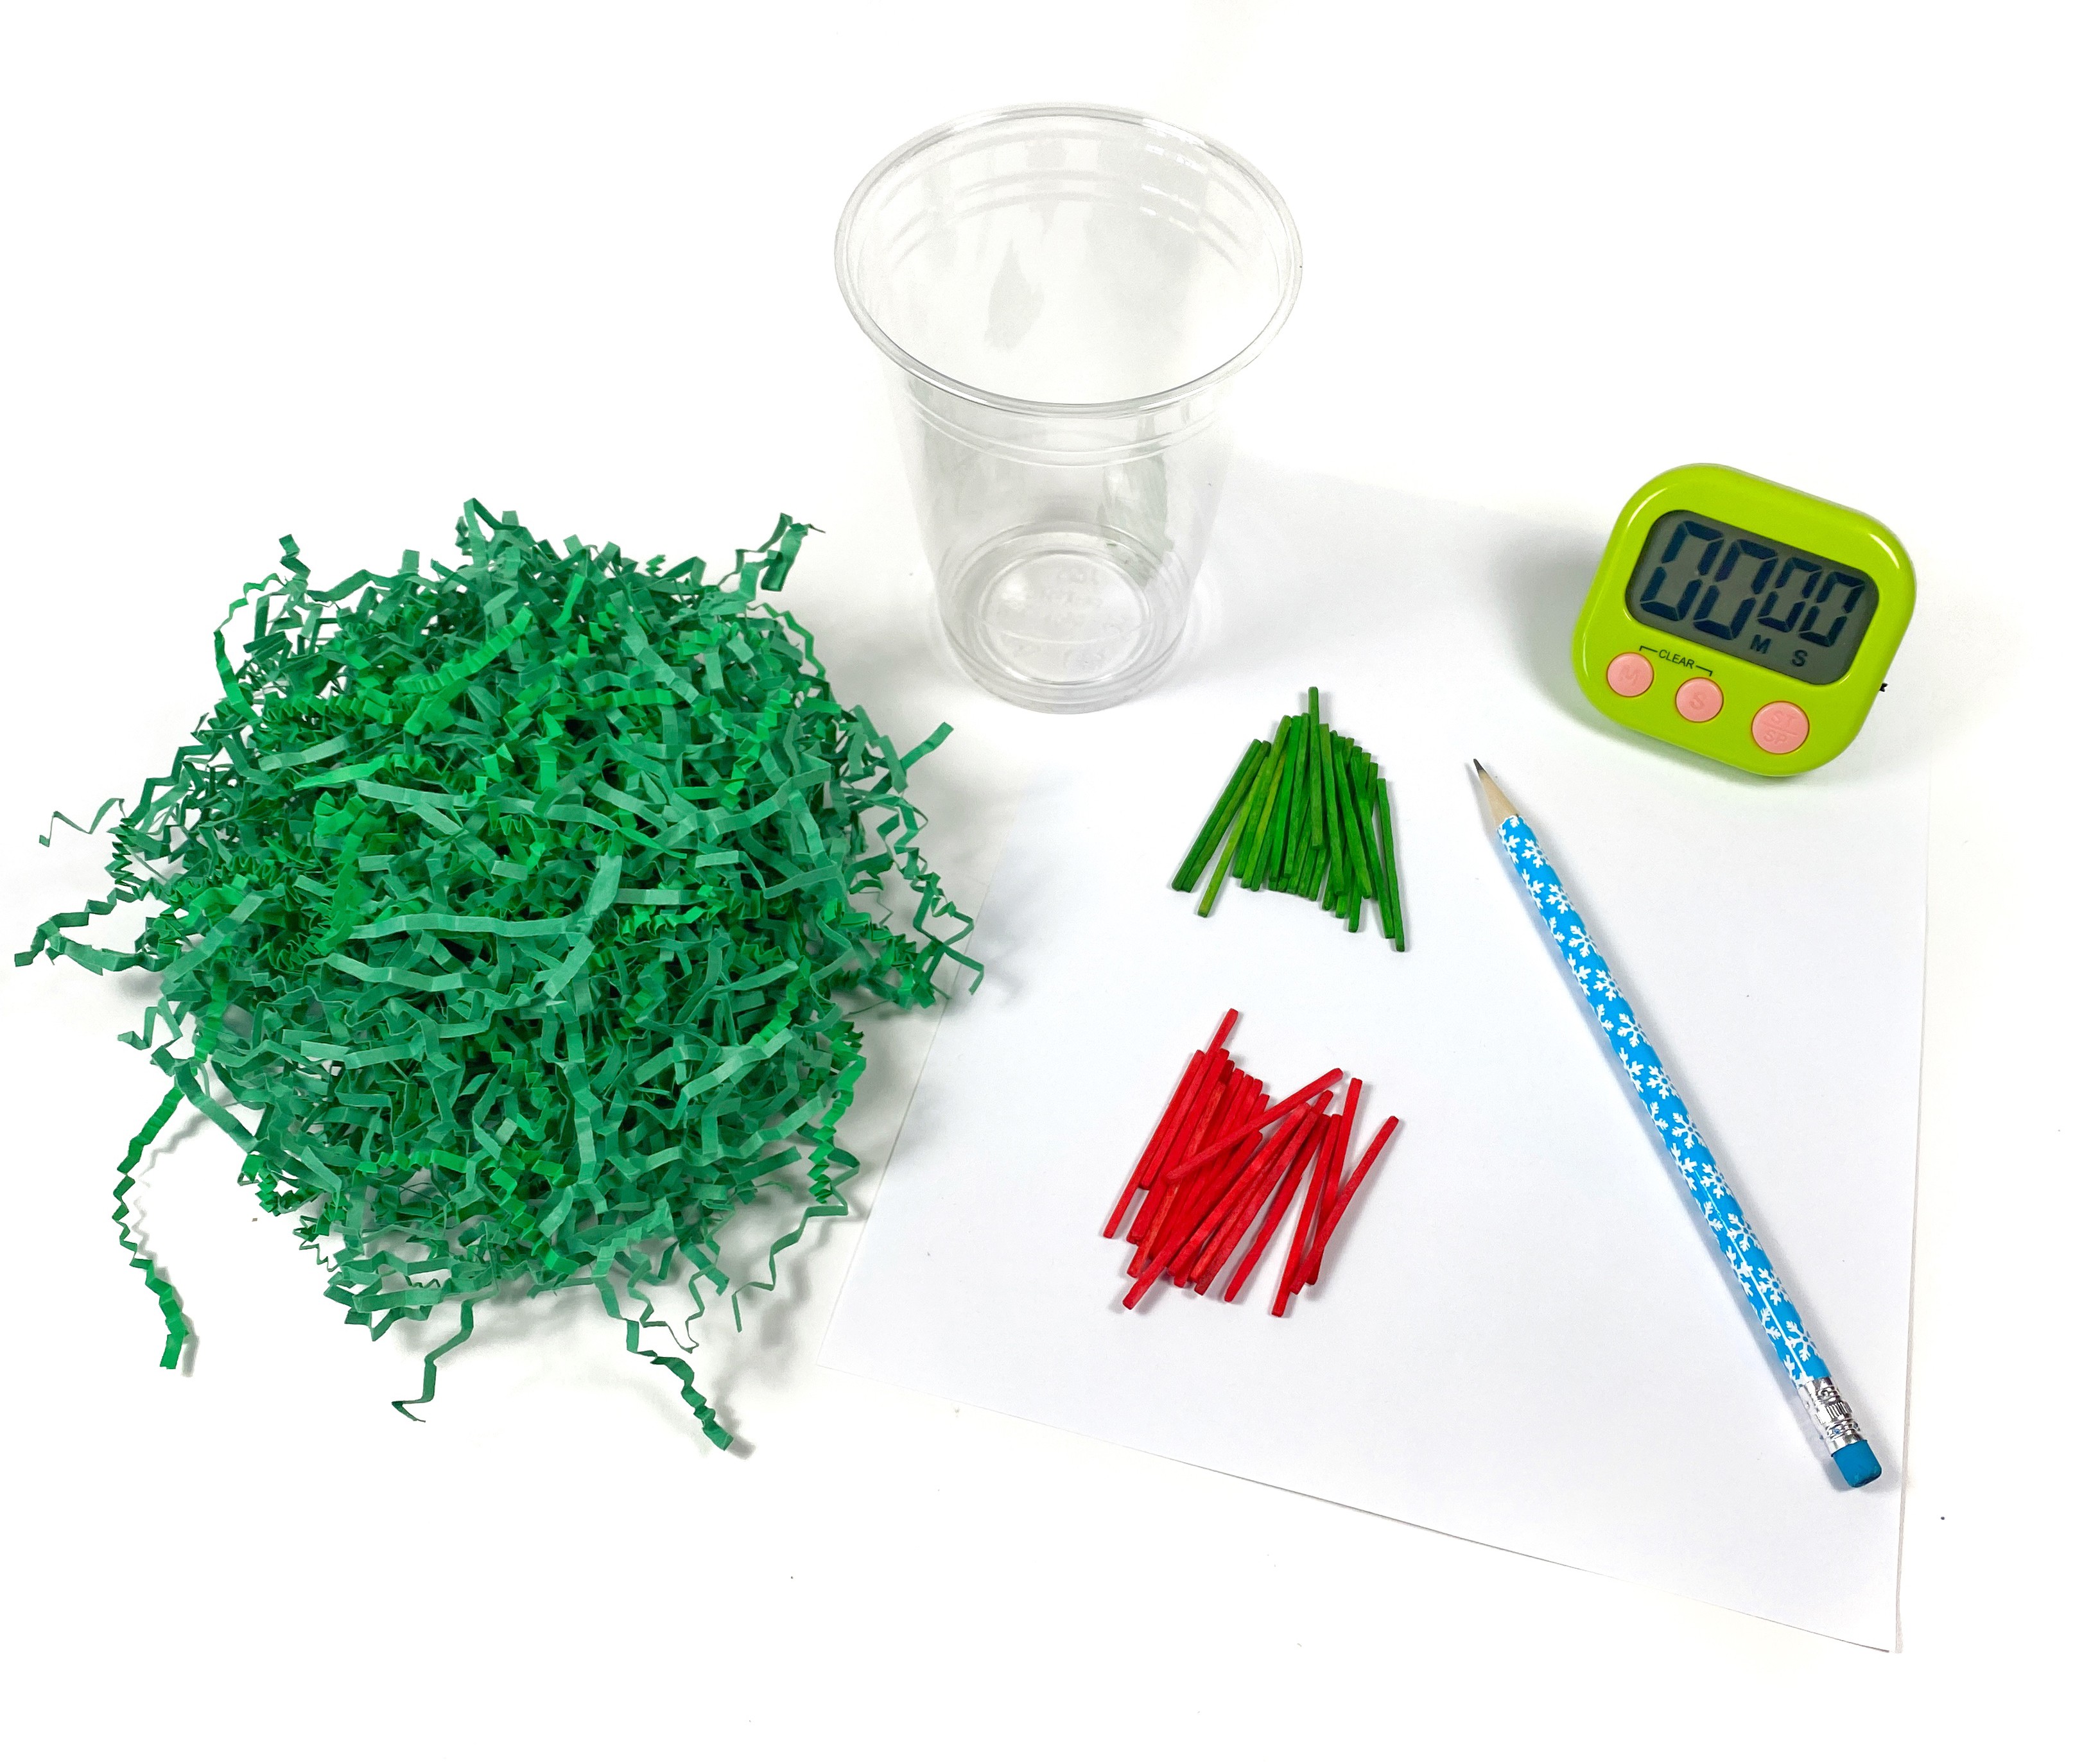 Green shredded paper, red and green matchsticks, a pencil, a sheet of paper, and a timer on a table.